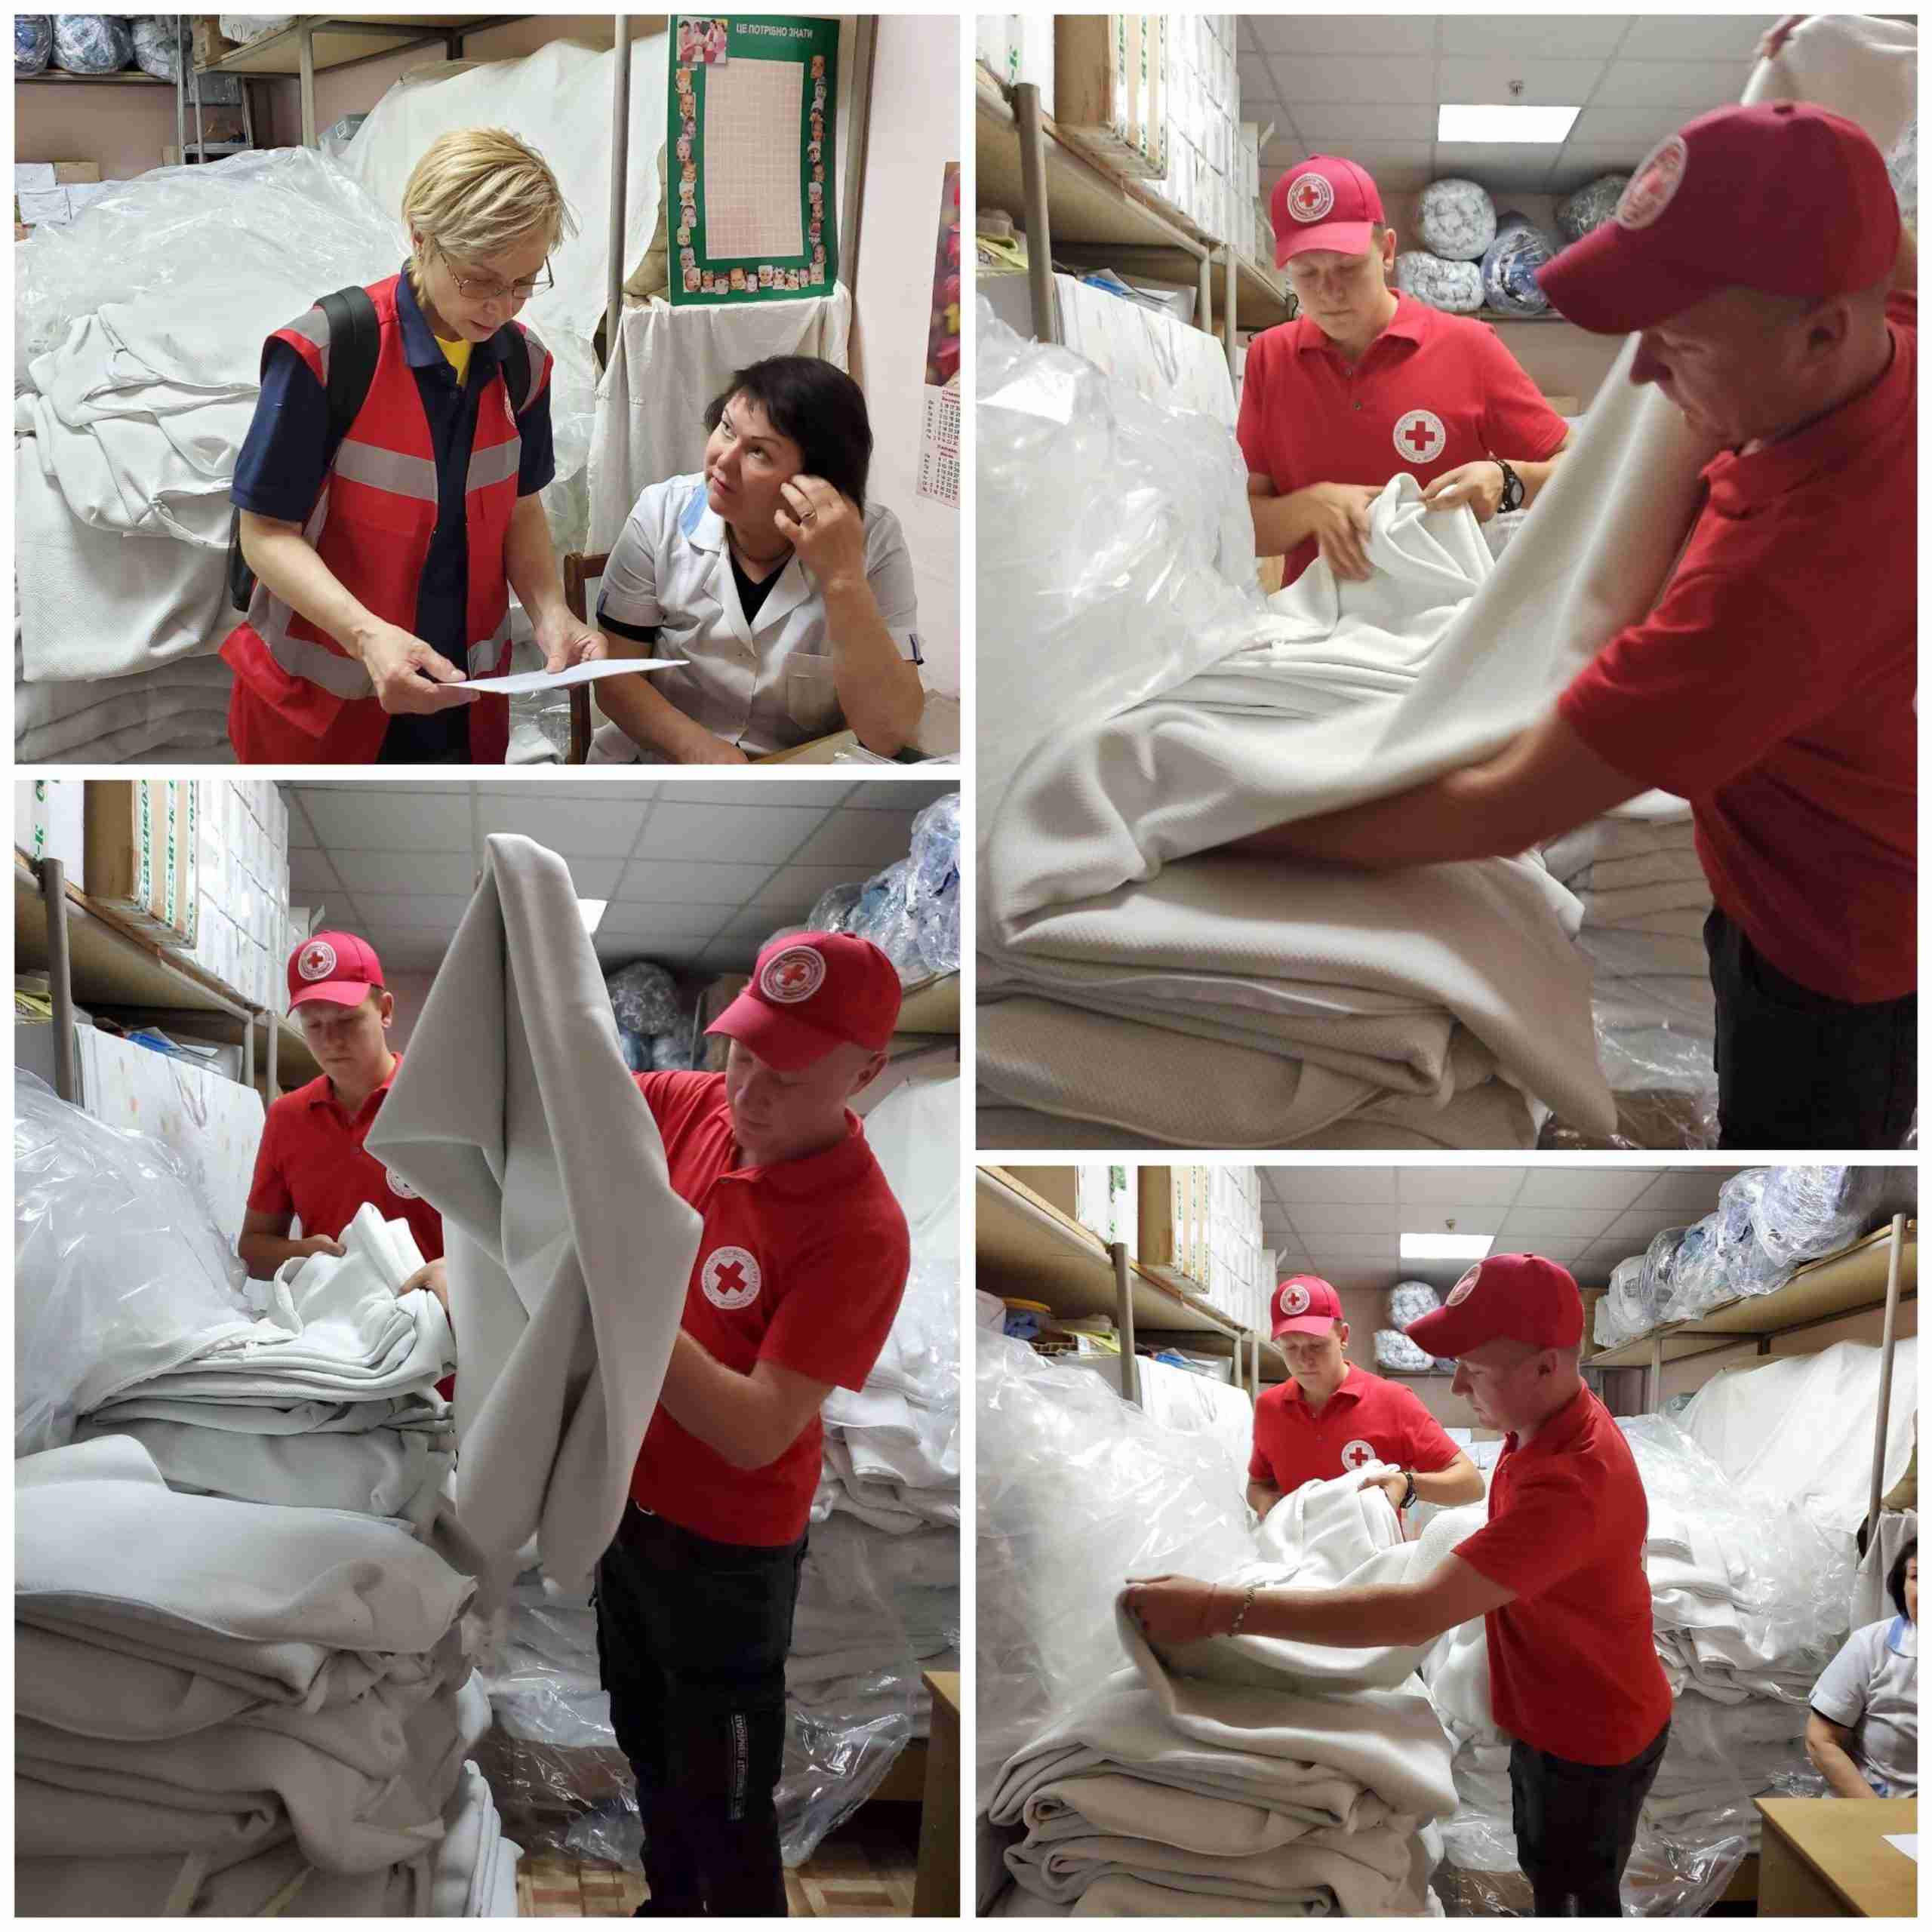 Red Cross in Dnipro sorting out the mattress covers for the delivered mattresses.